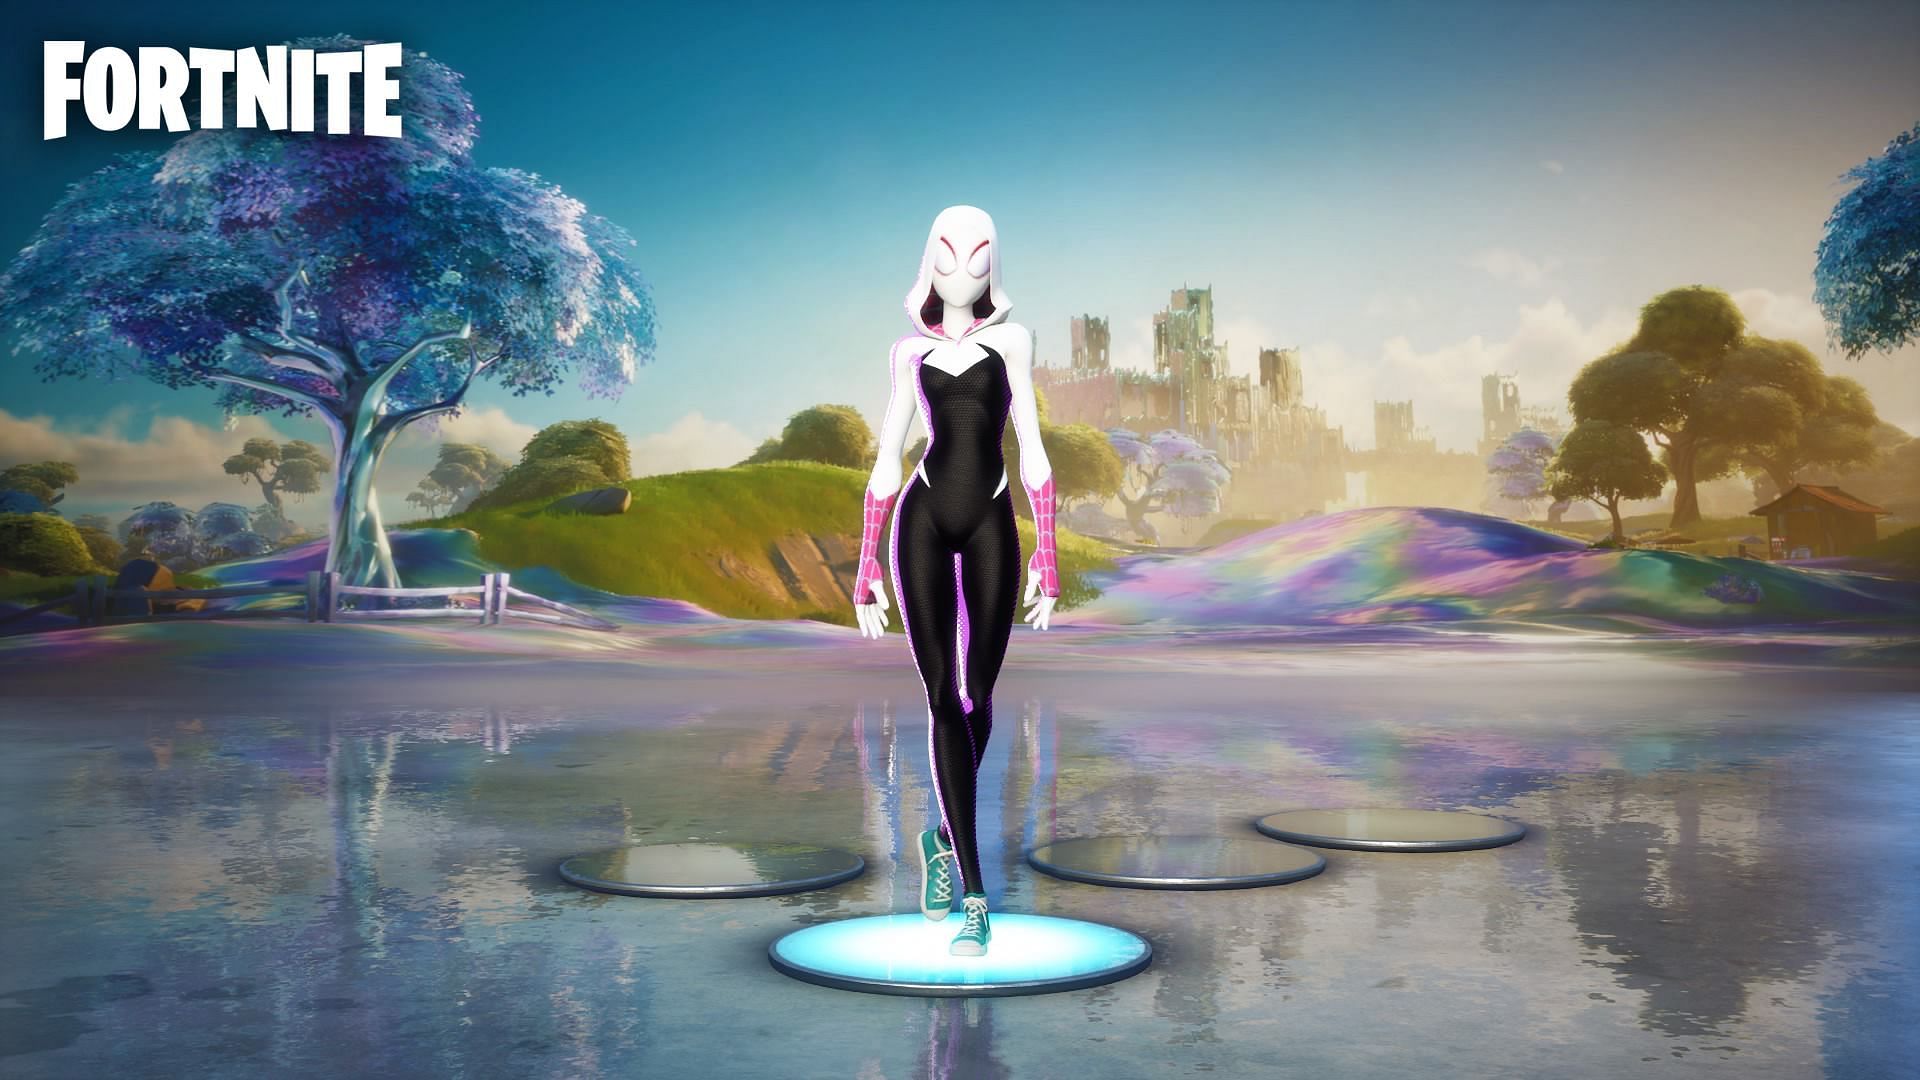 Spider-Gwen Fortnite skin is available in the Chapter 3 Season 4 Battle Pass (Image via Sportskeeda)